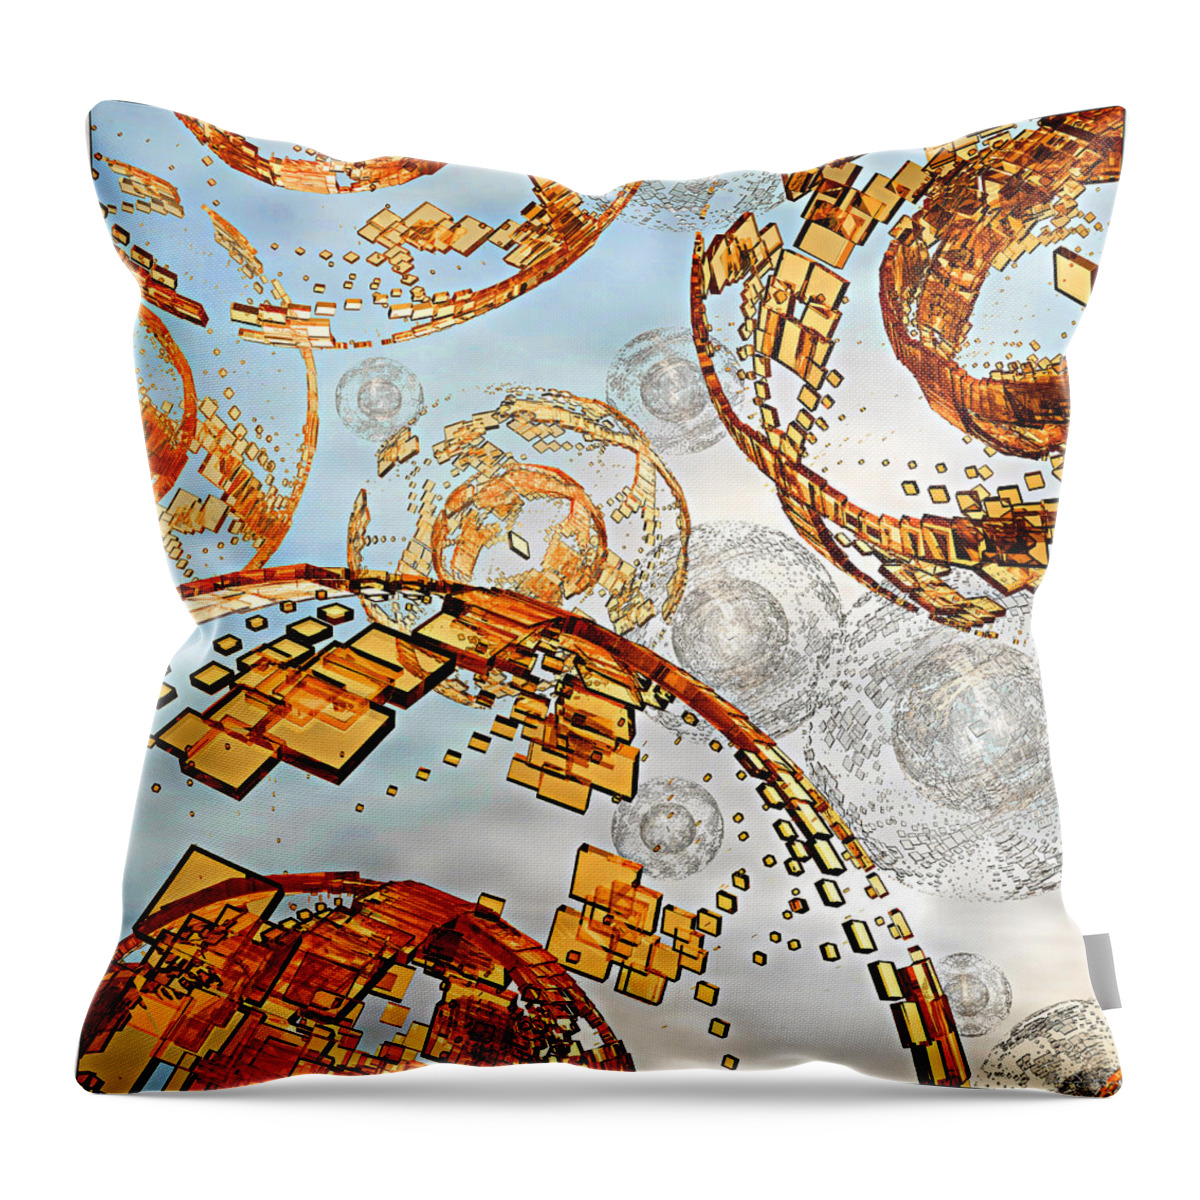 Abstract Throw Pillow featuring the digital art Groboto Experiment 7 by Peter J Sucy